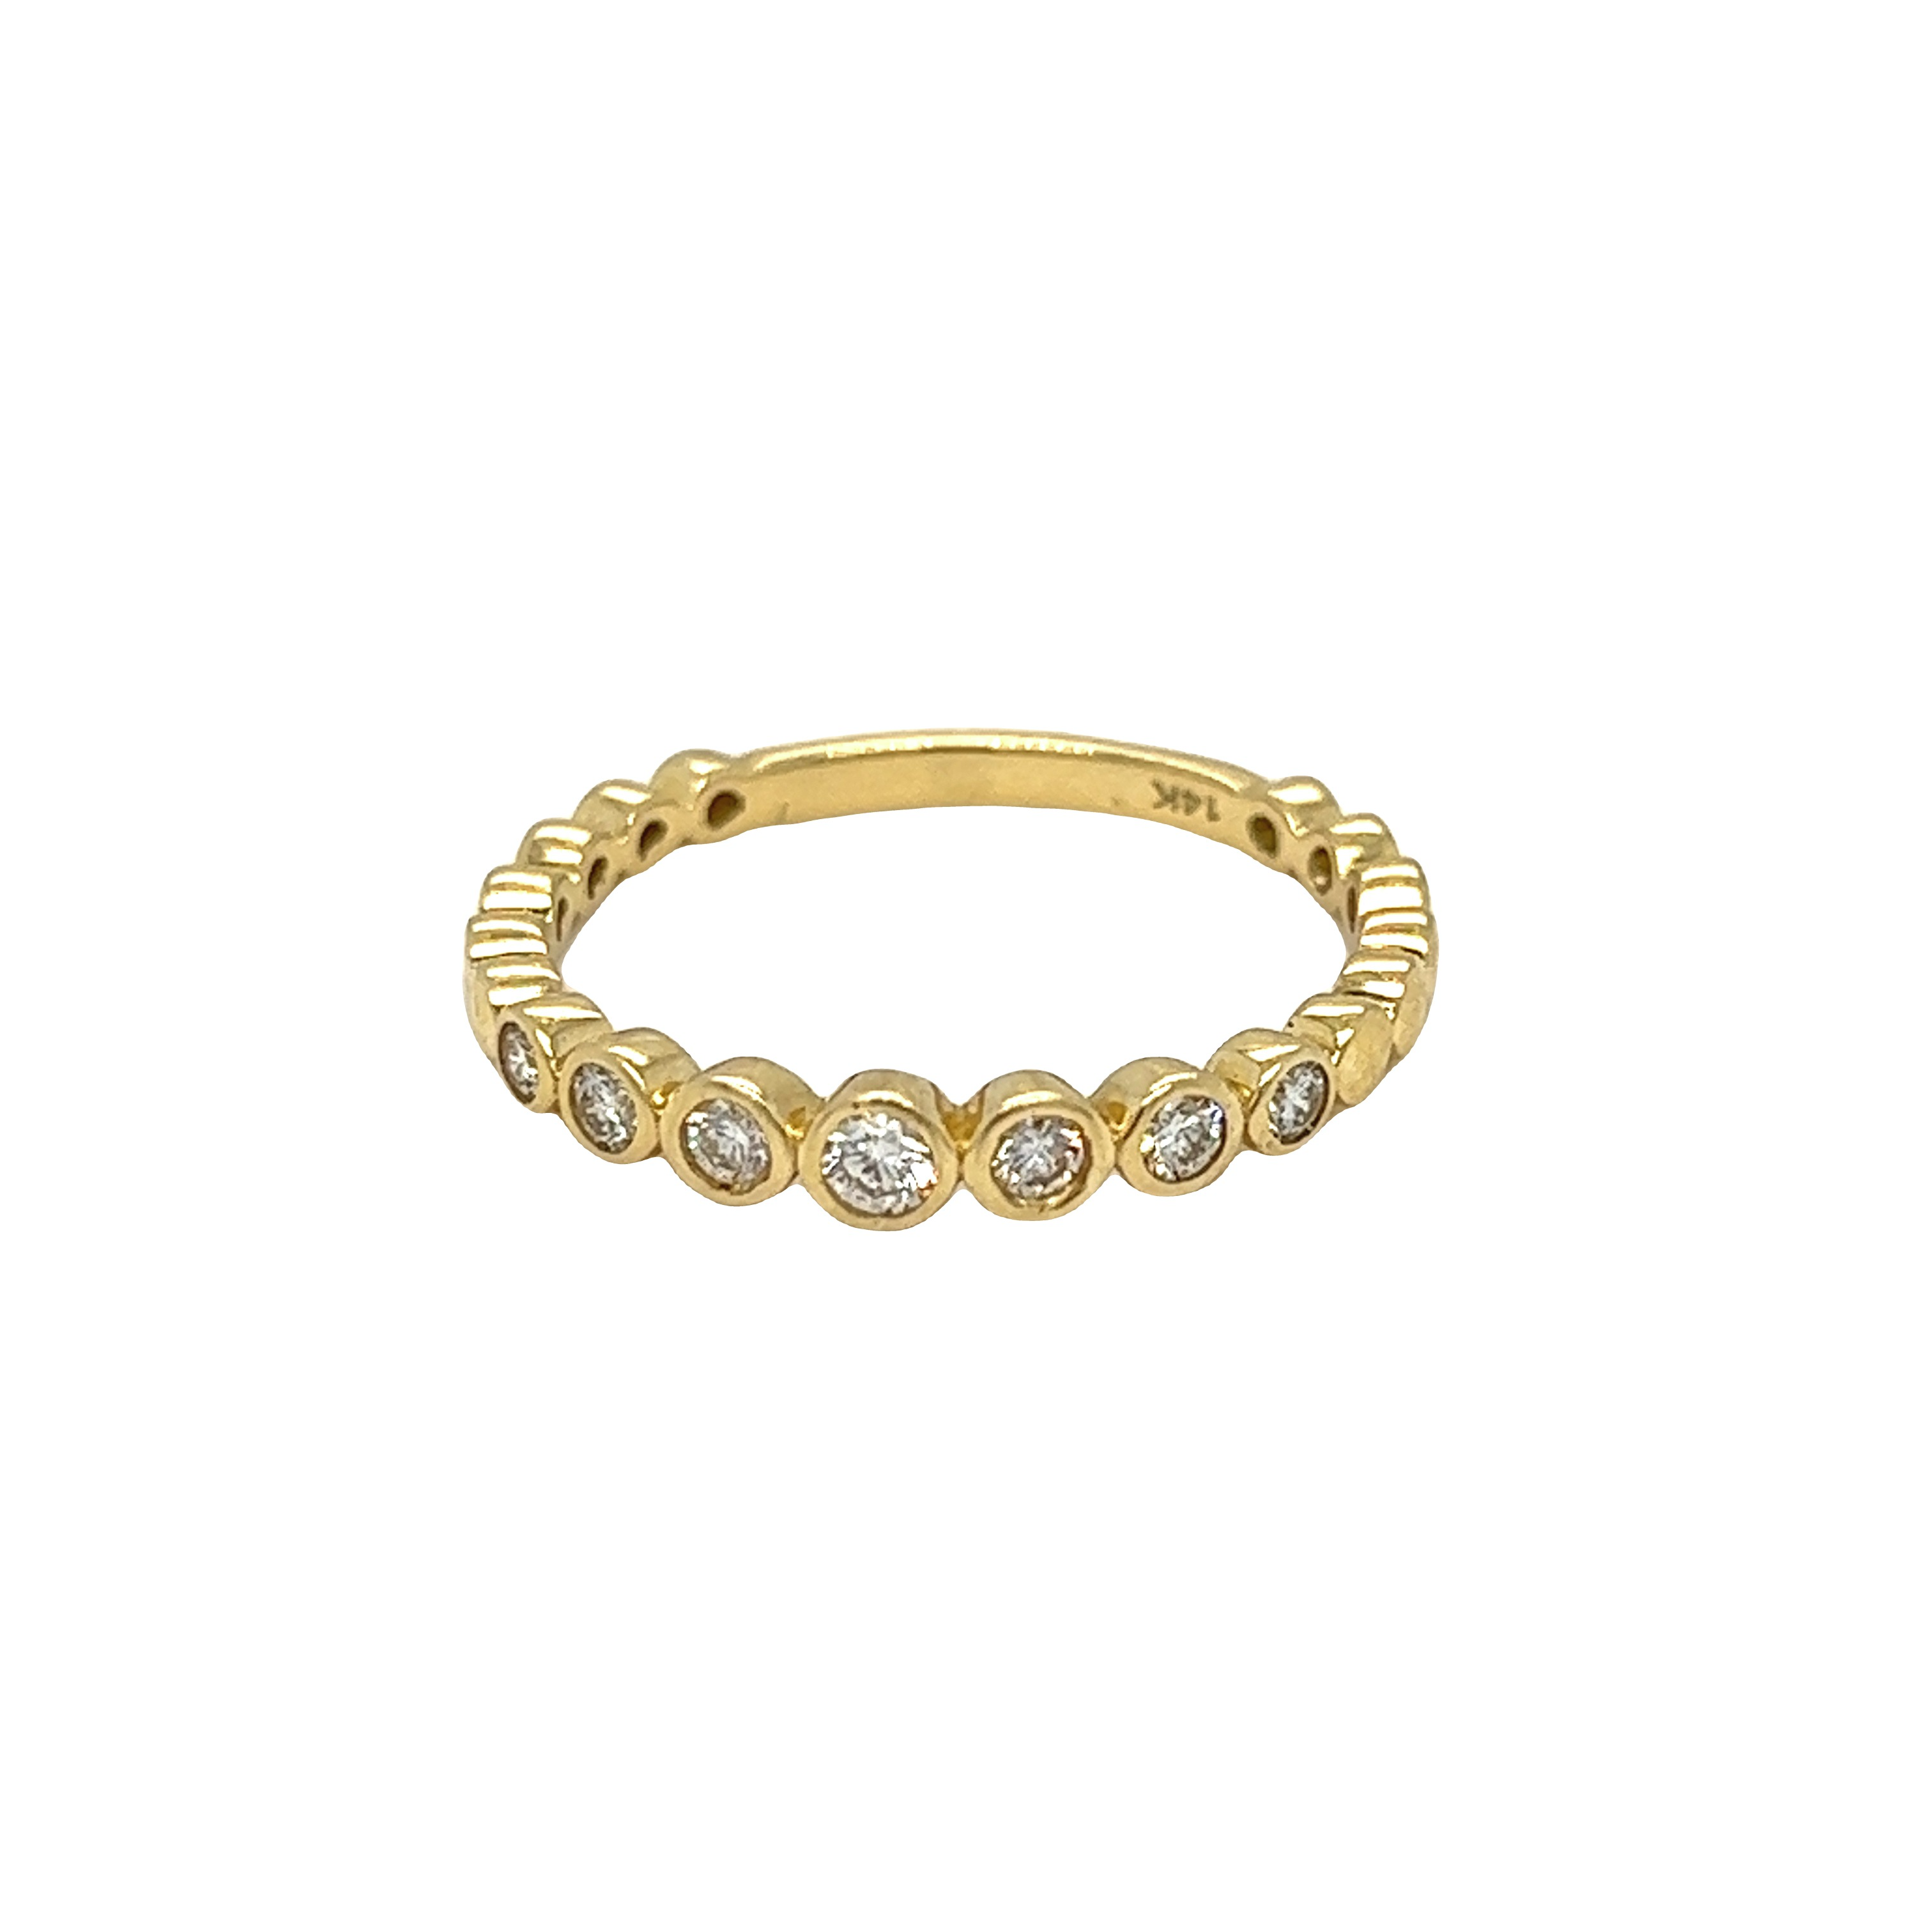 Featured image for “Bezeled Diamond Stackable Ring”